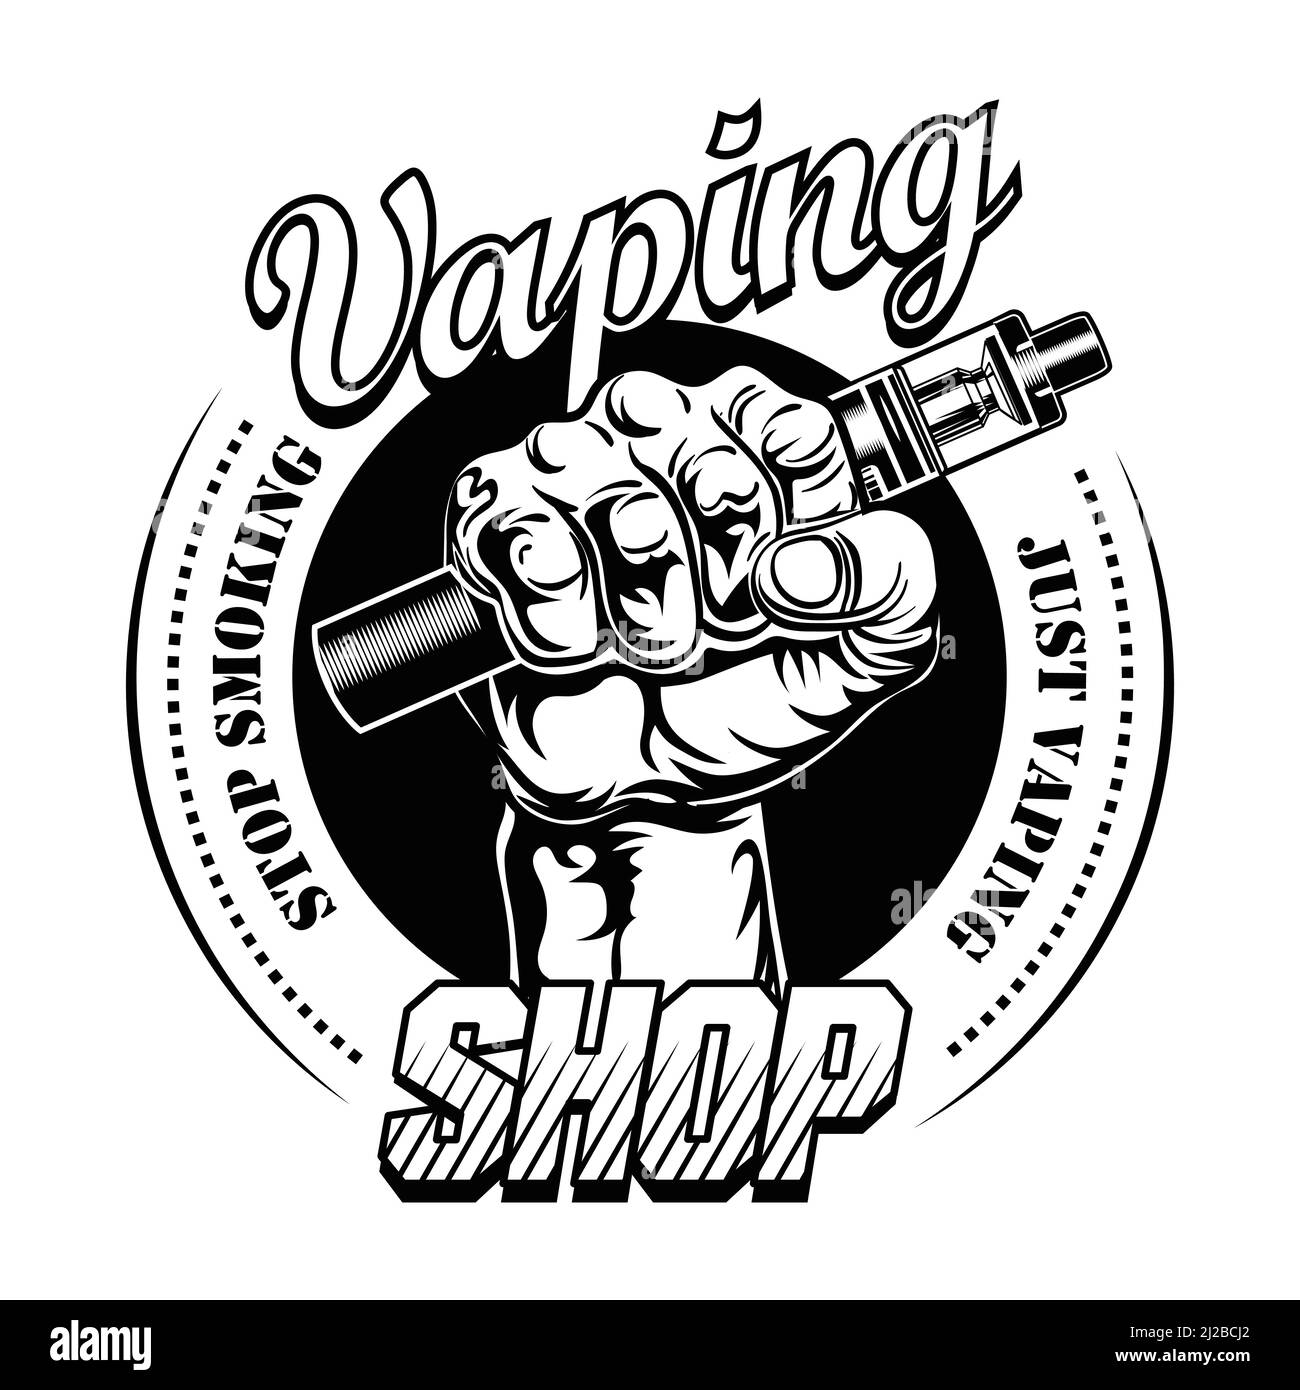 Hand pf vaper vector illustration. Male hand holding electronic cigarette, stop smoking text, stamp. Retail concept for vape bar or store label, poste Stock Vector